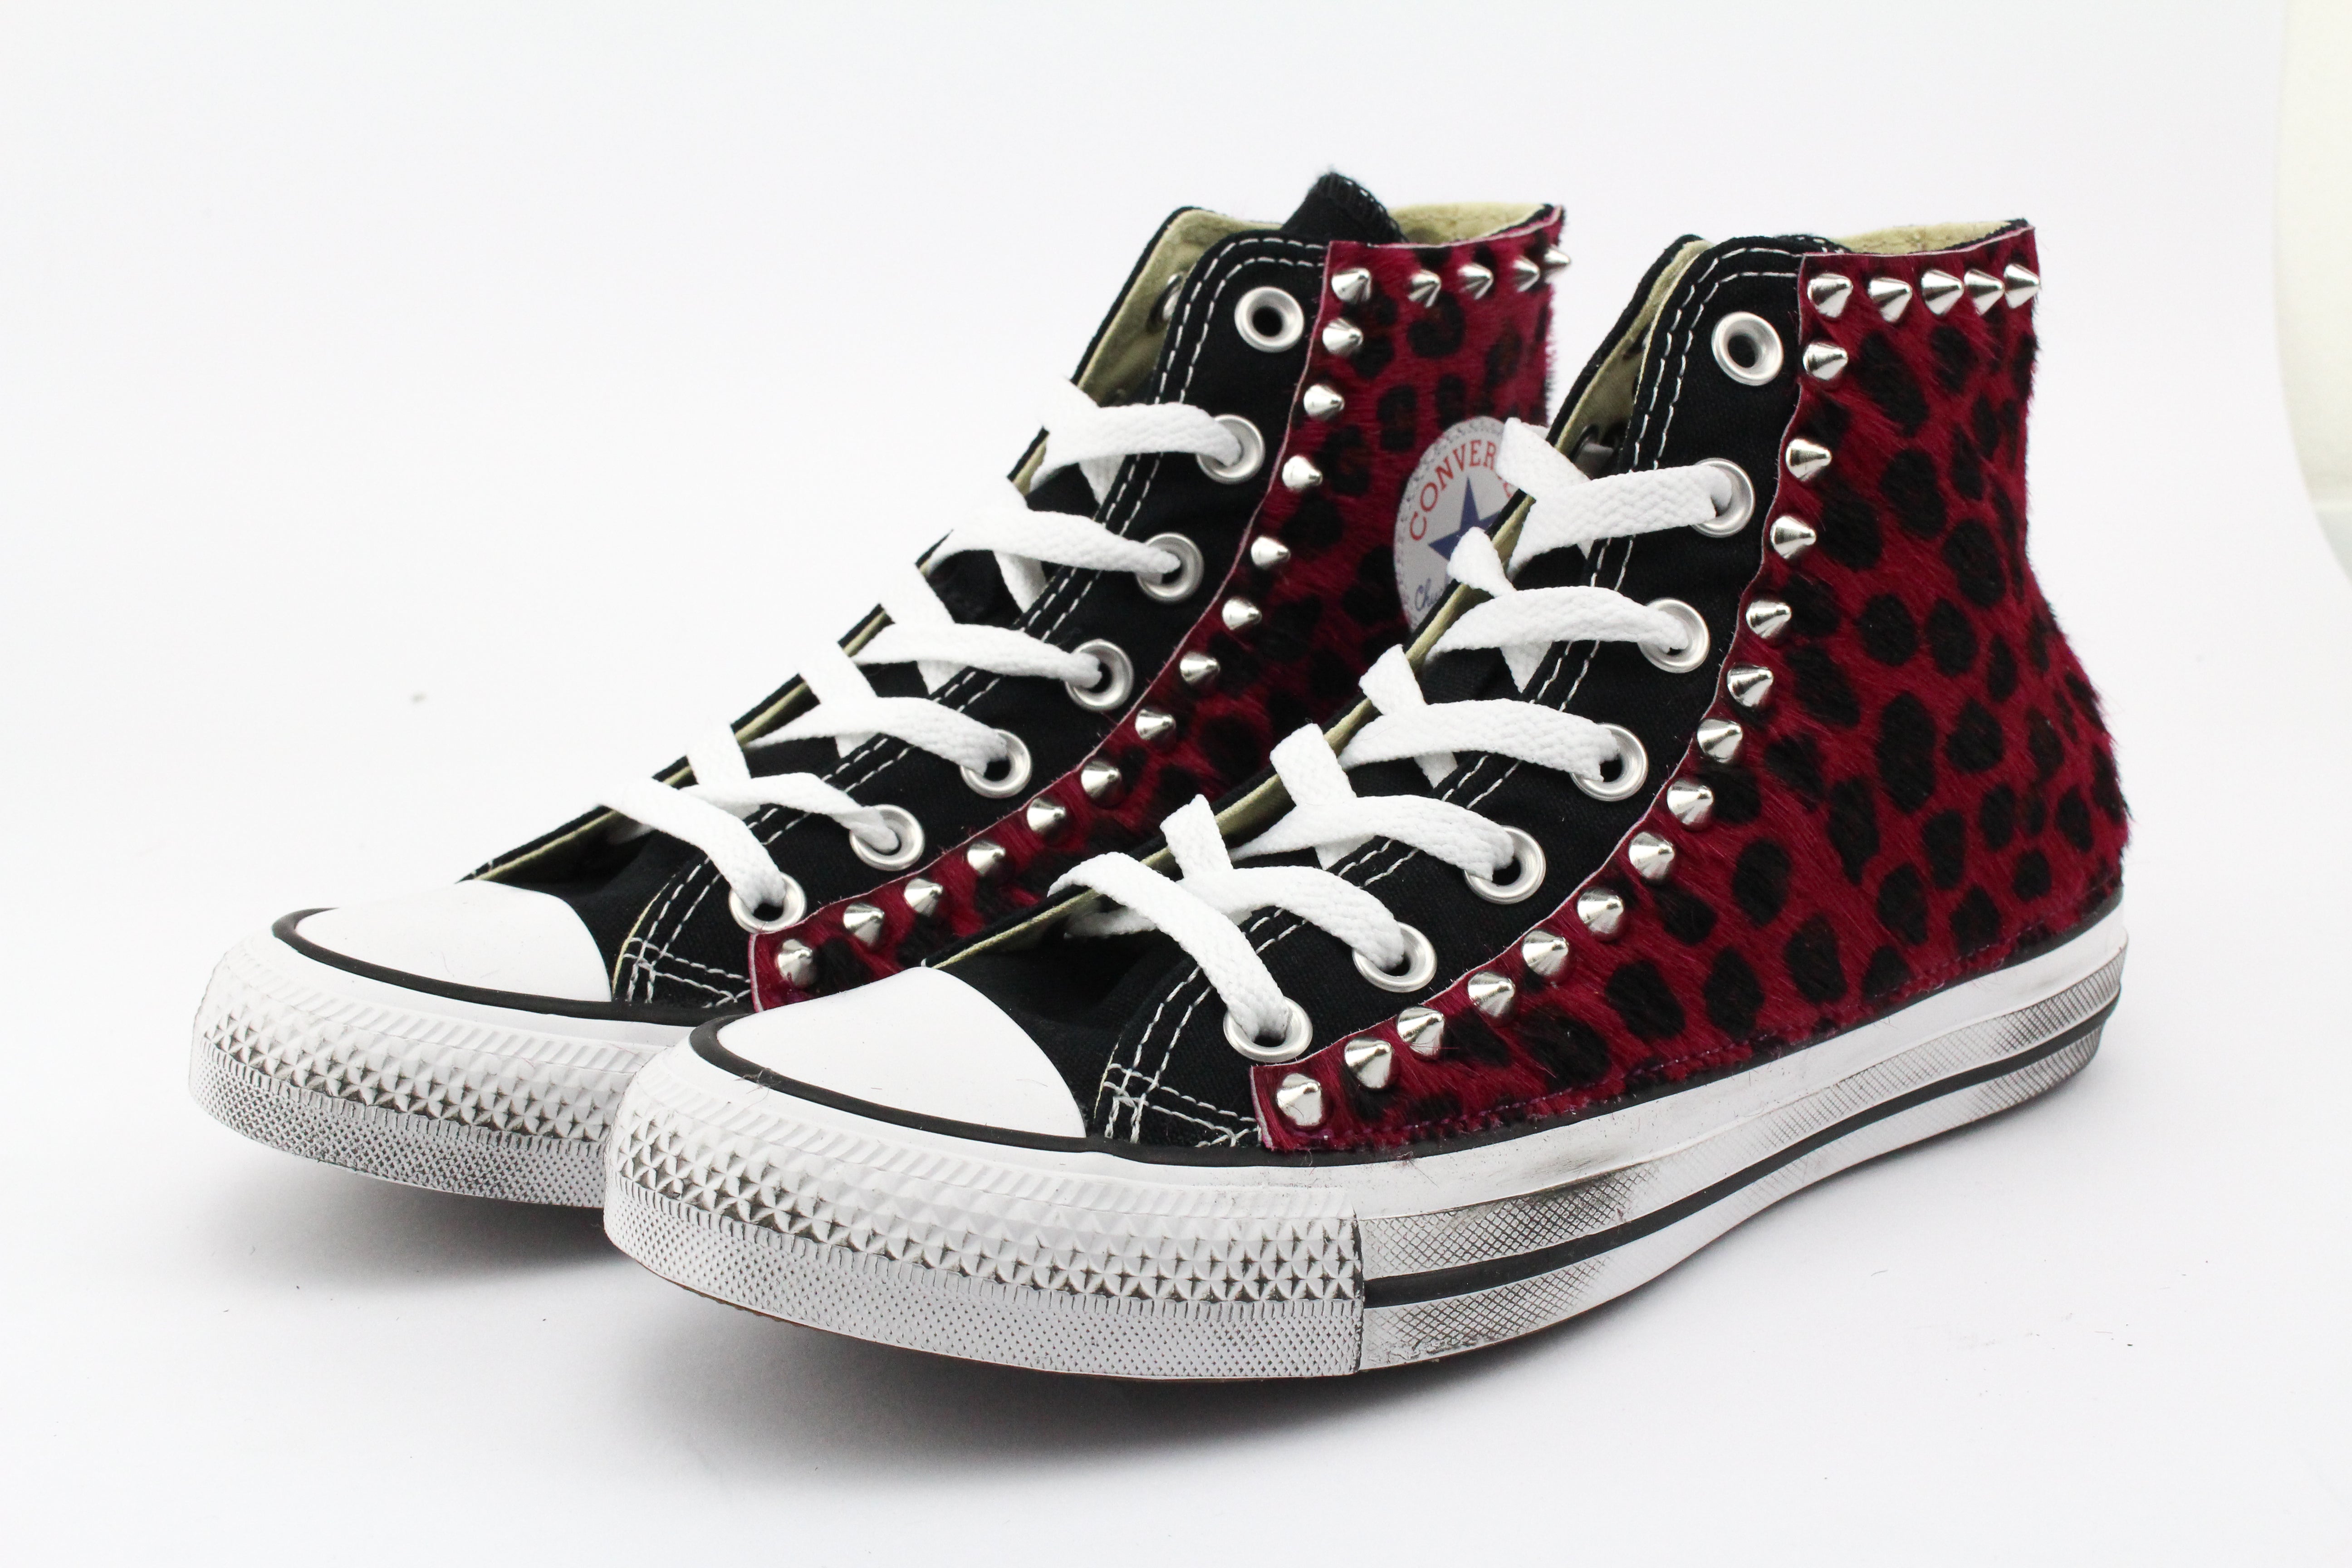 Converse All Star Black Maculate Rosso & Borchie